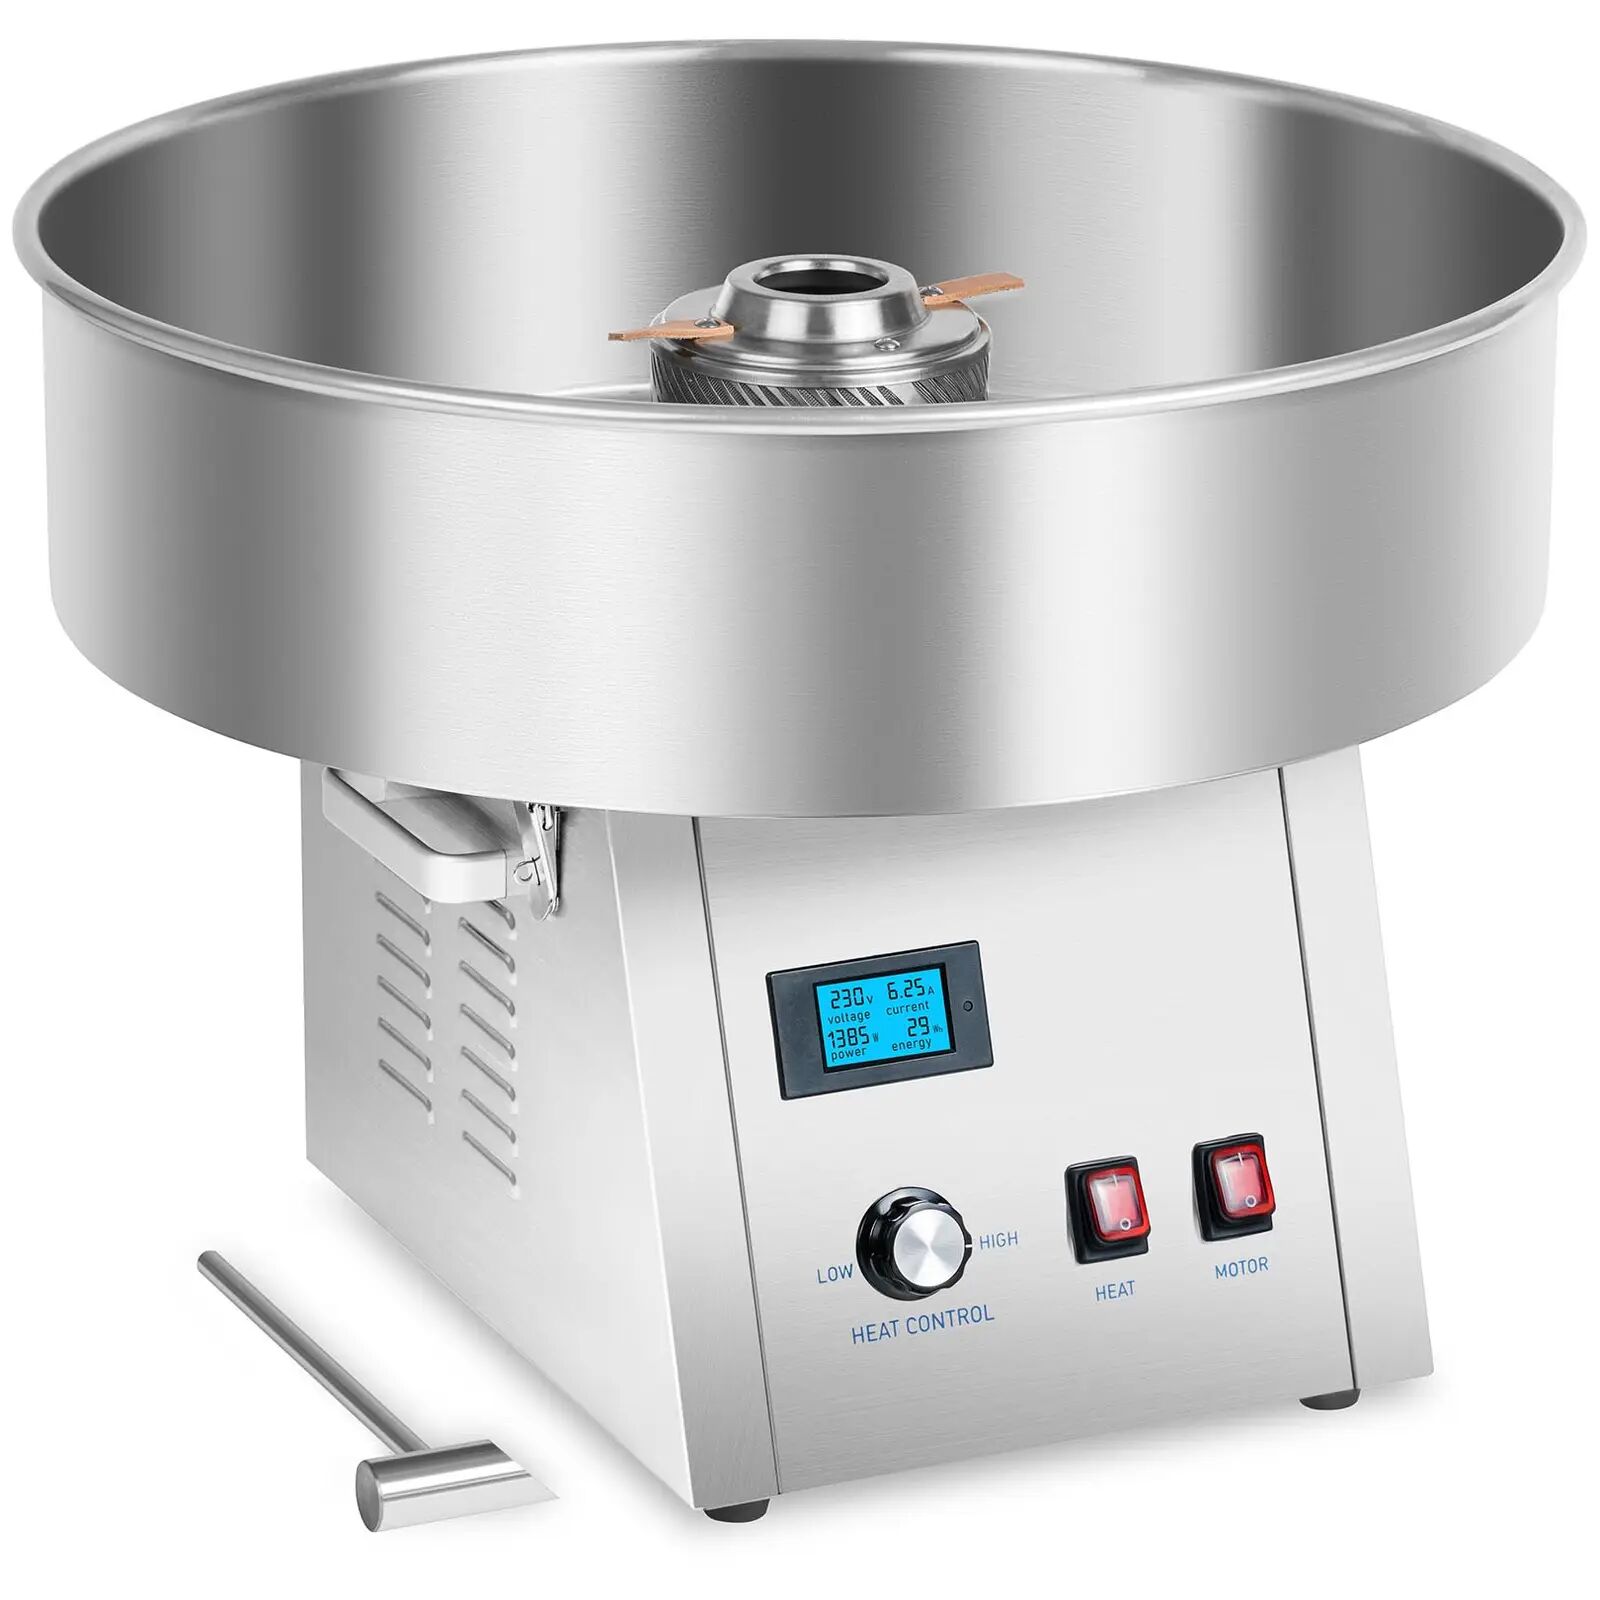 Royal Catering Candy Floss Machine - 62 cm - stainless steel - shock absorber RCZK-1500S-W